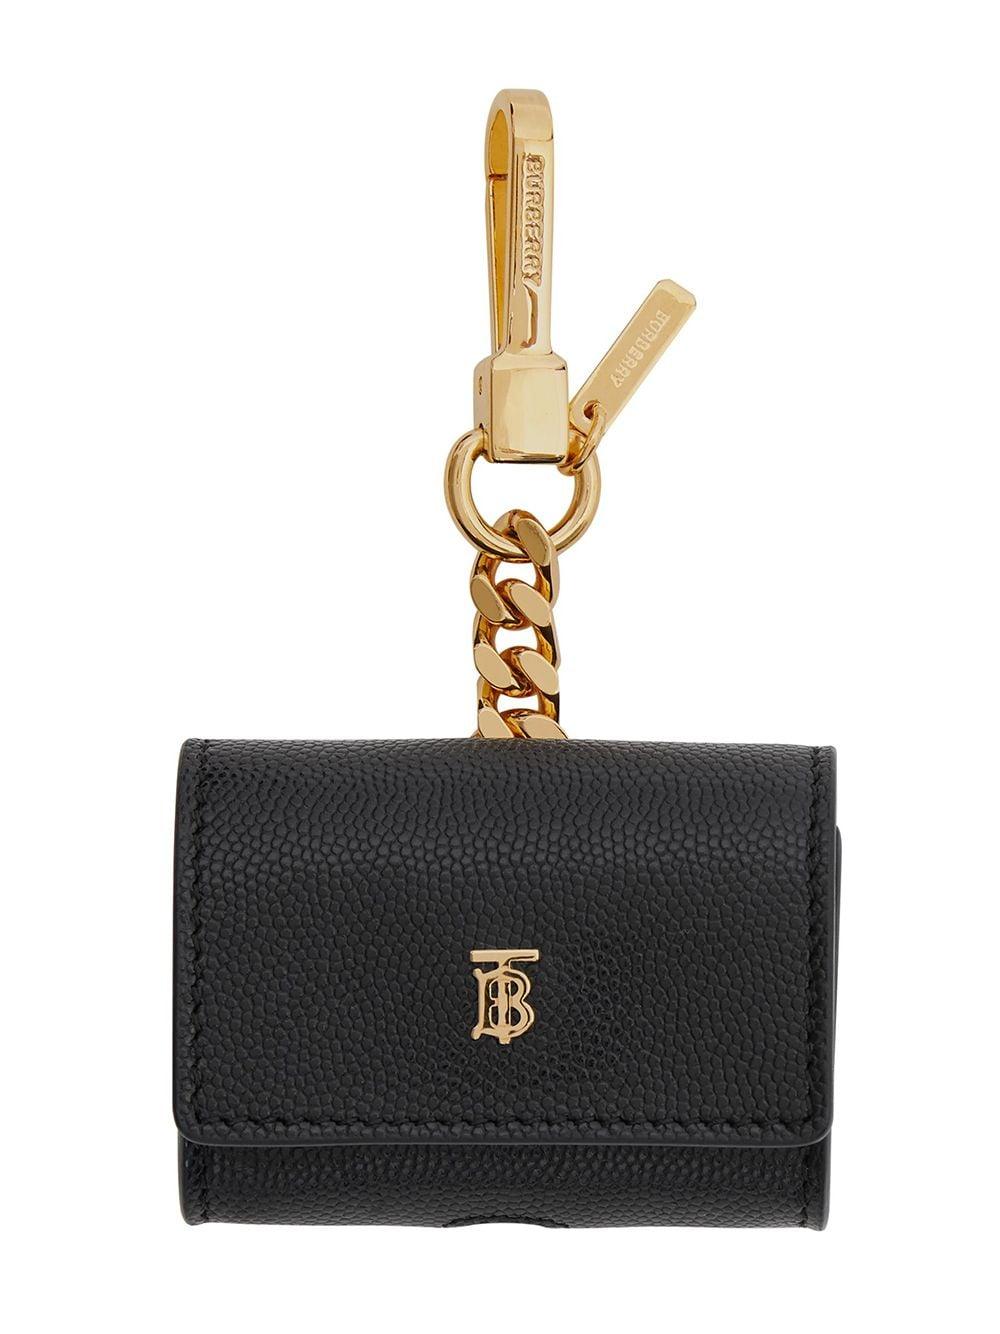 Burberry Leather Airpod Pro Case in Black   Lyst